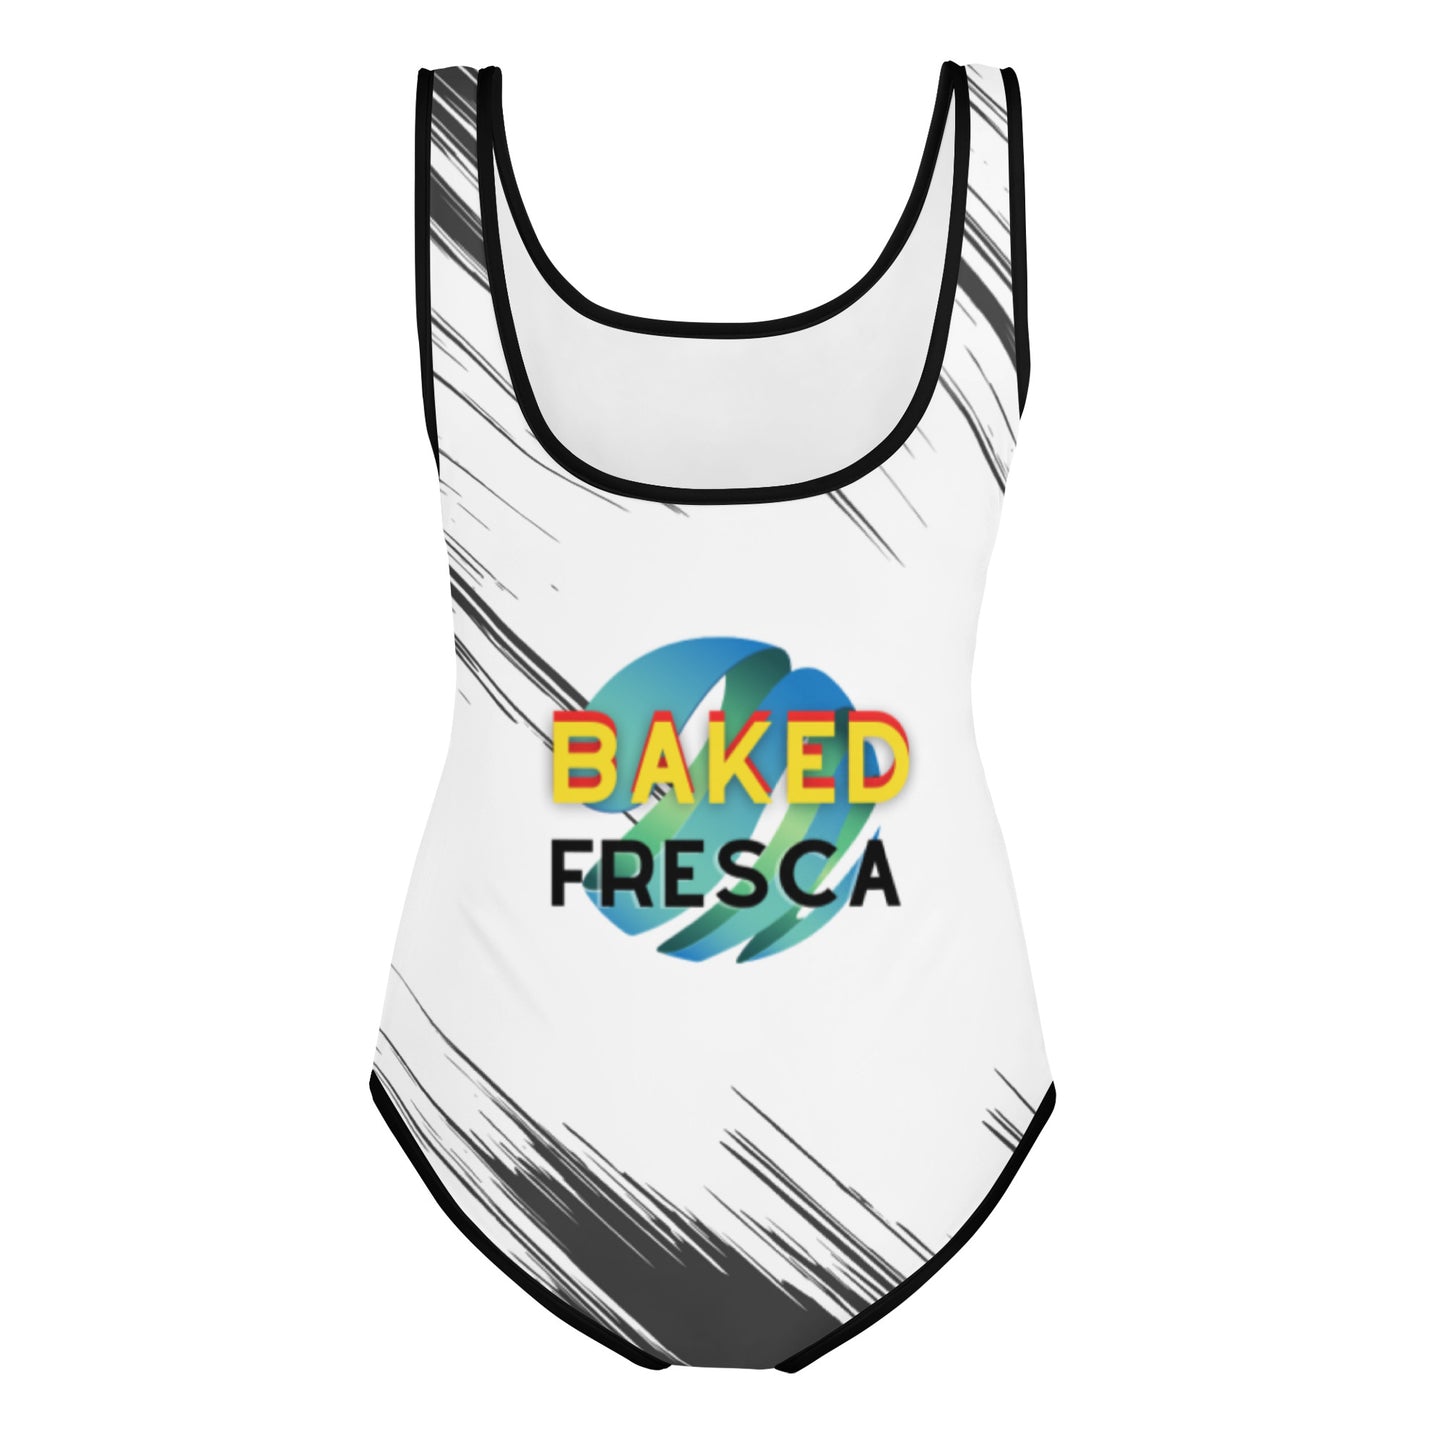 Sophisticated Cruise Youth Swimsuit by Baked Fresca